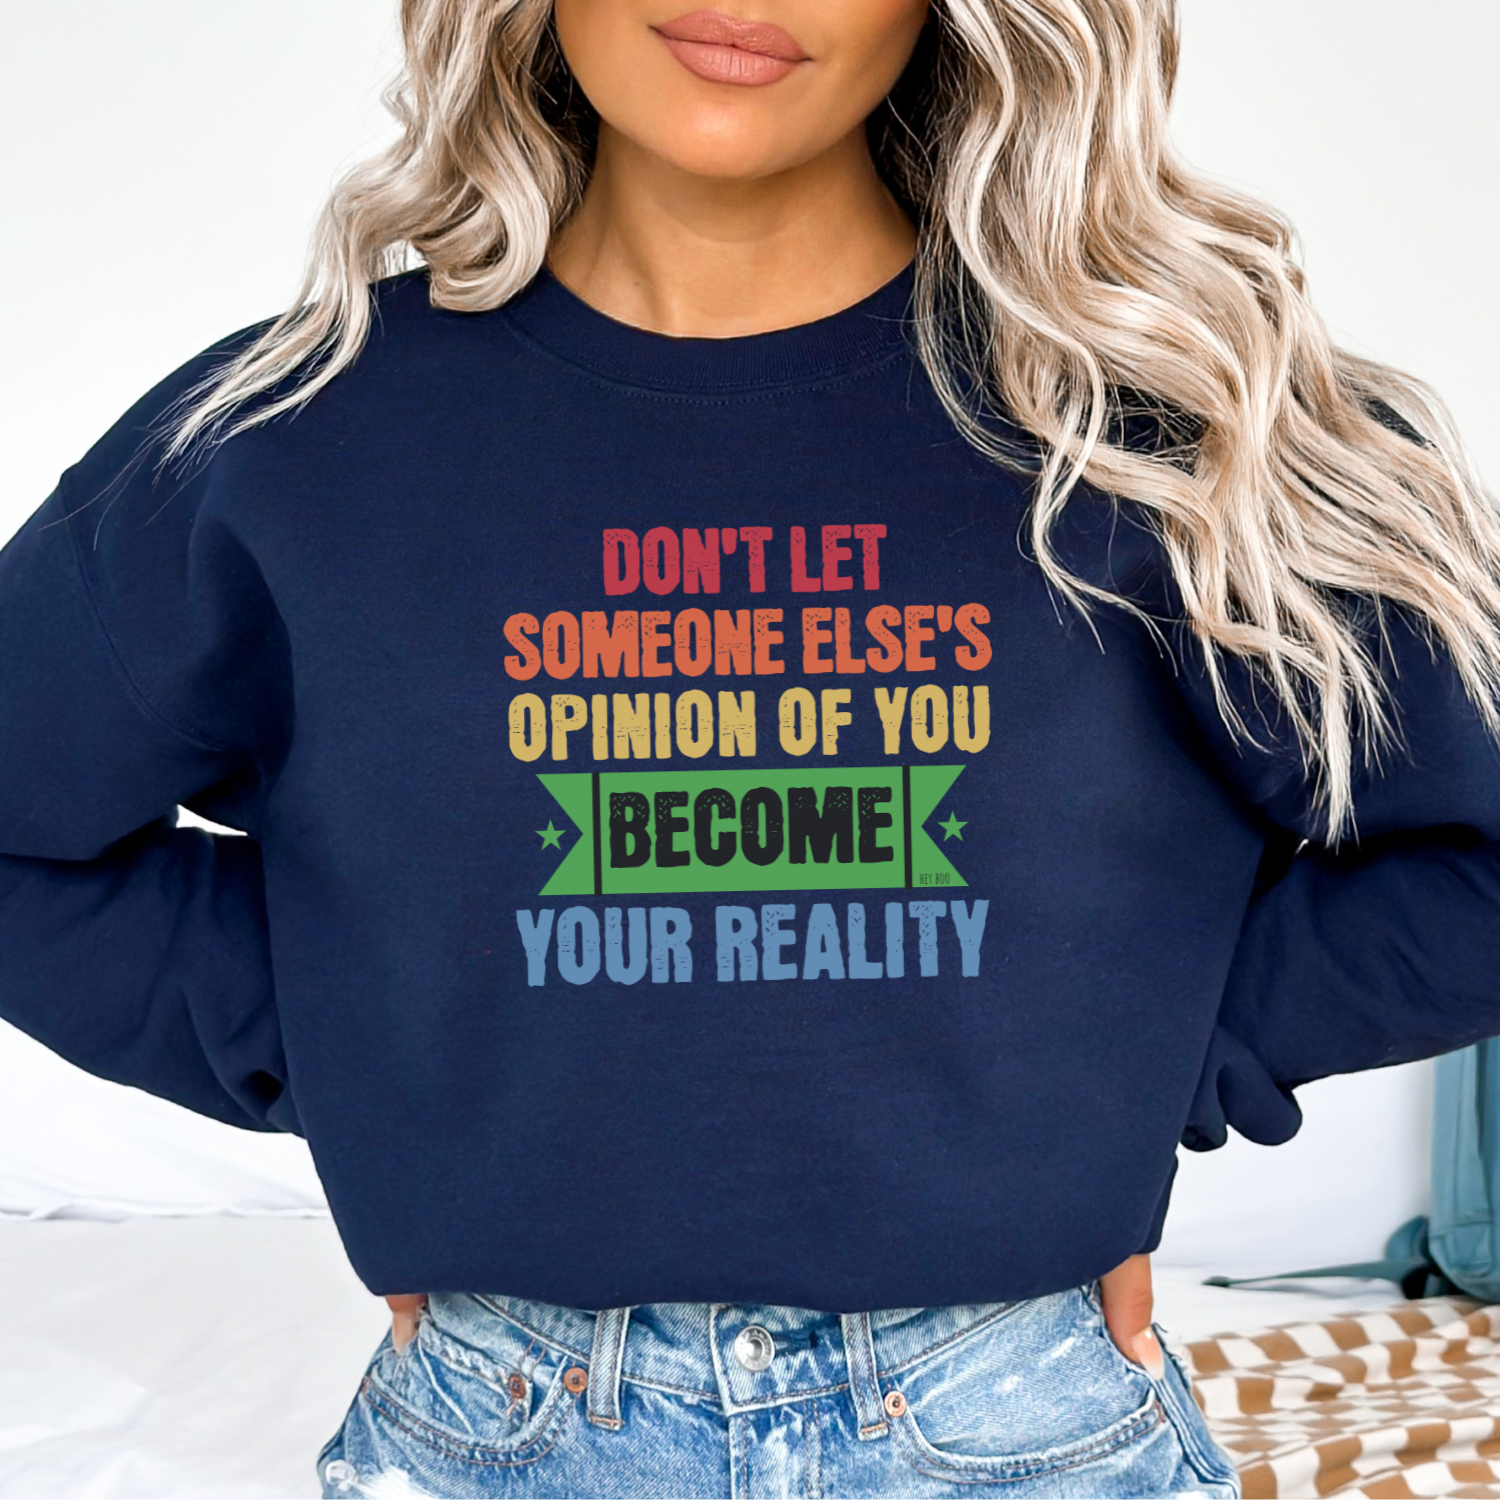 Navy Gildan sweatshirt: Don't Let Someone Else's Opinion of You Become Your Reality. Define yourself, without letting others diminish your self-worth.